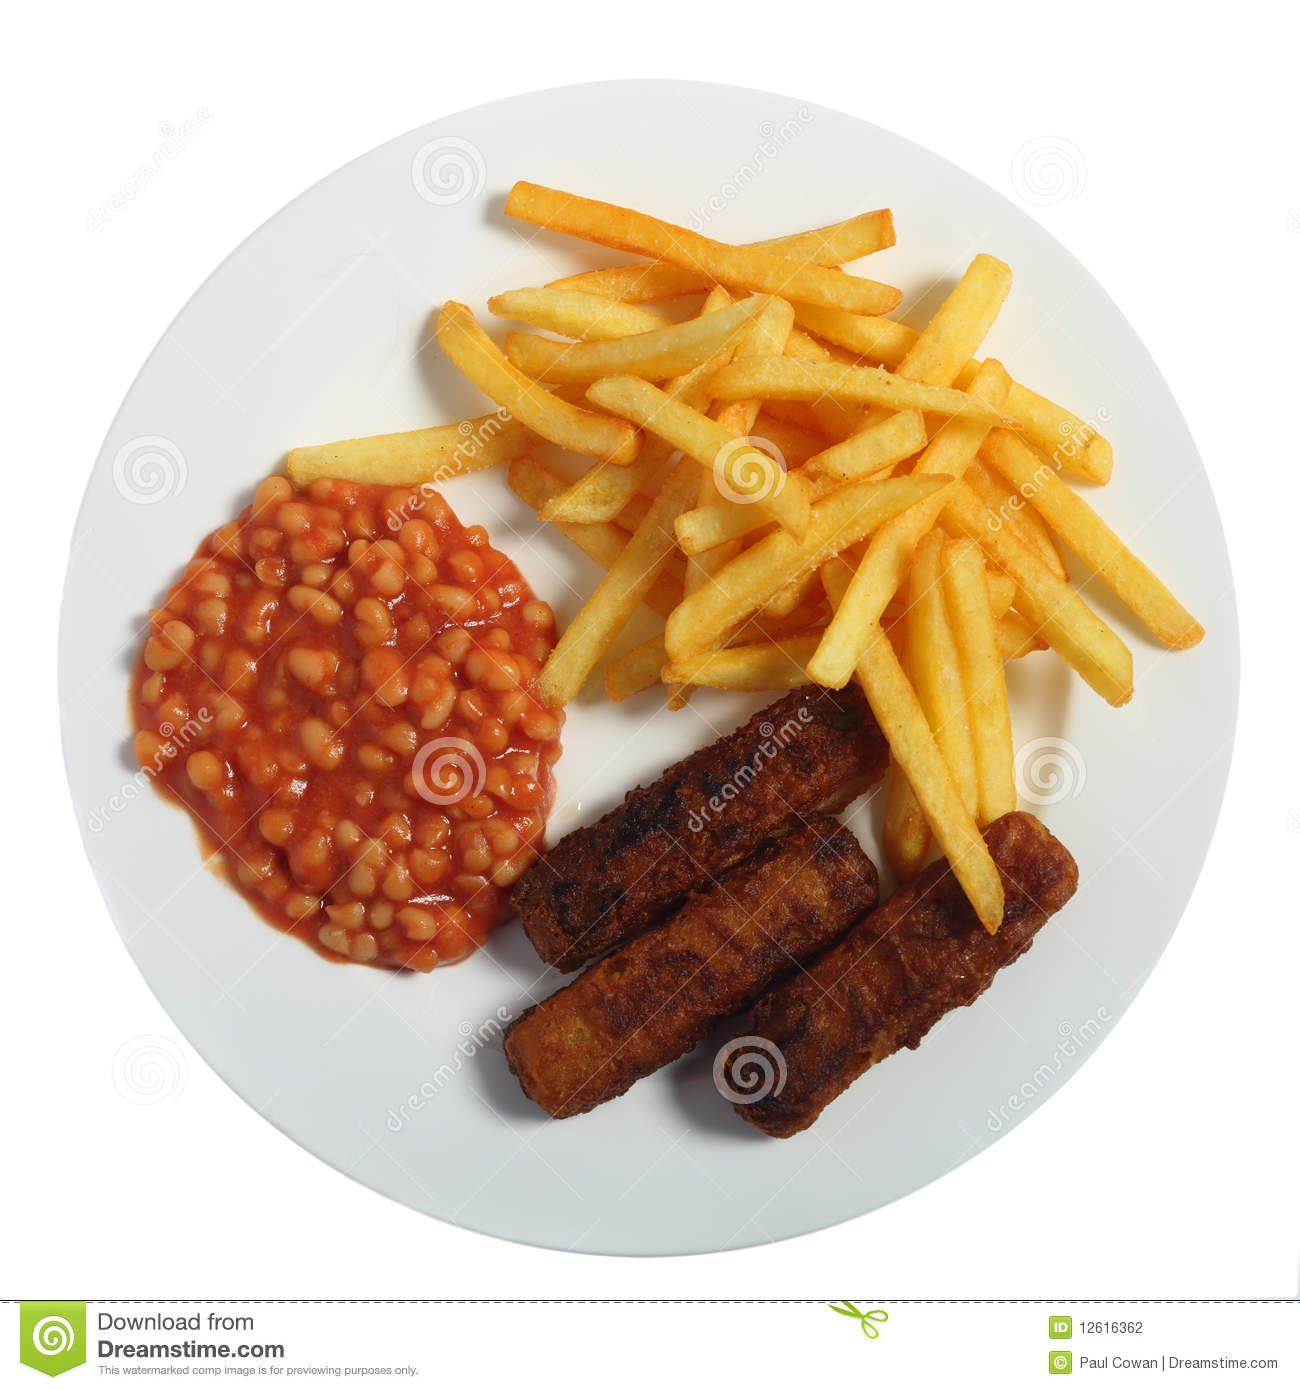 Typical English Fast Food Meal Of Fish Fingers Beans And Chips